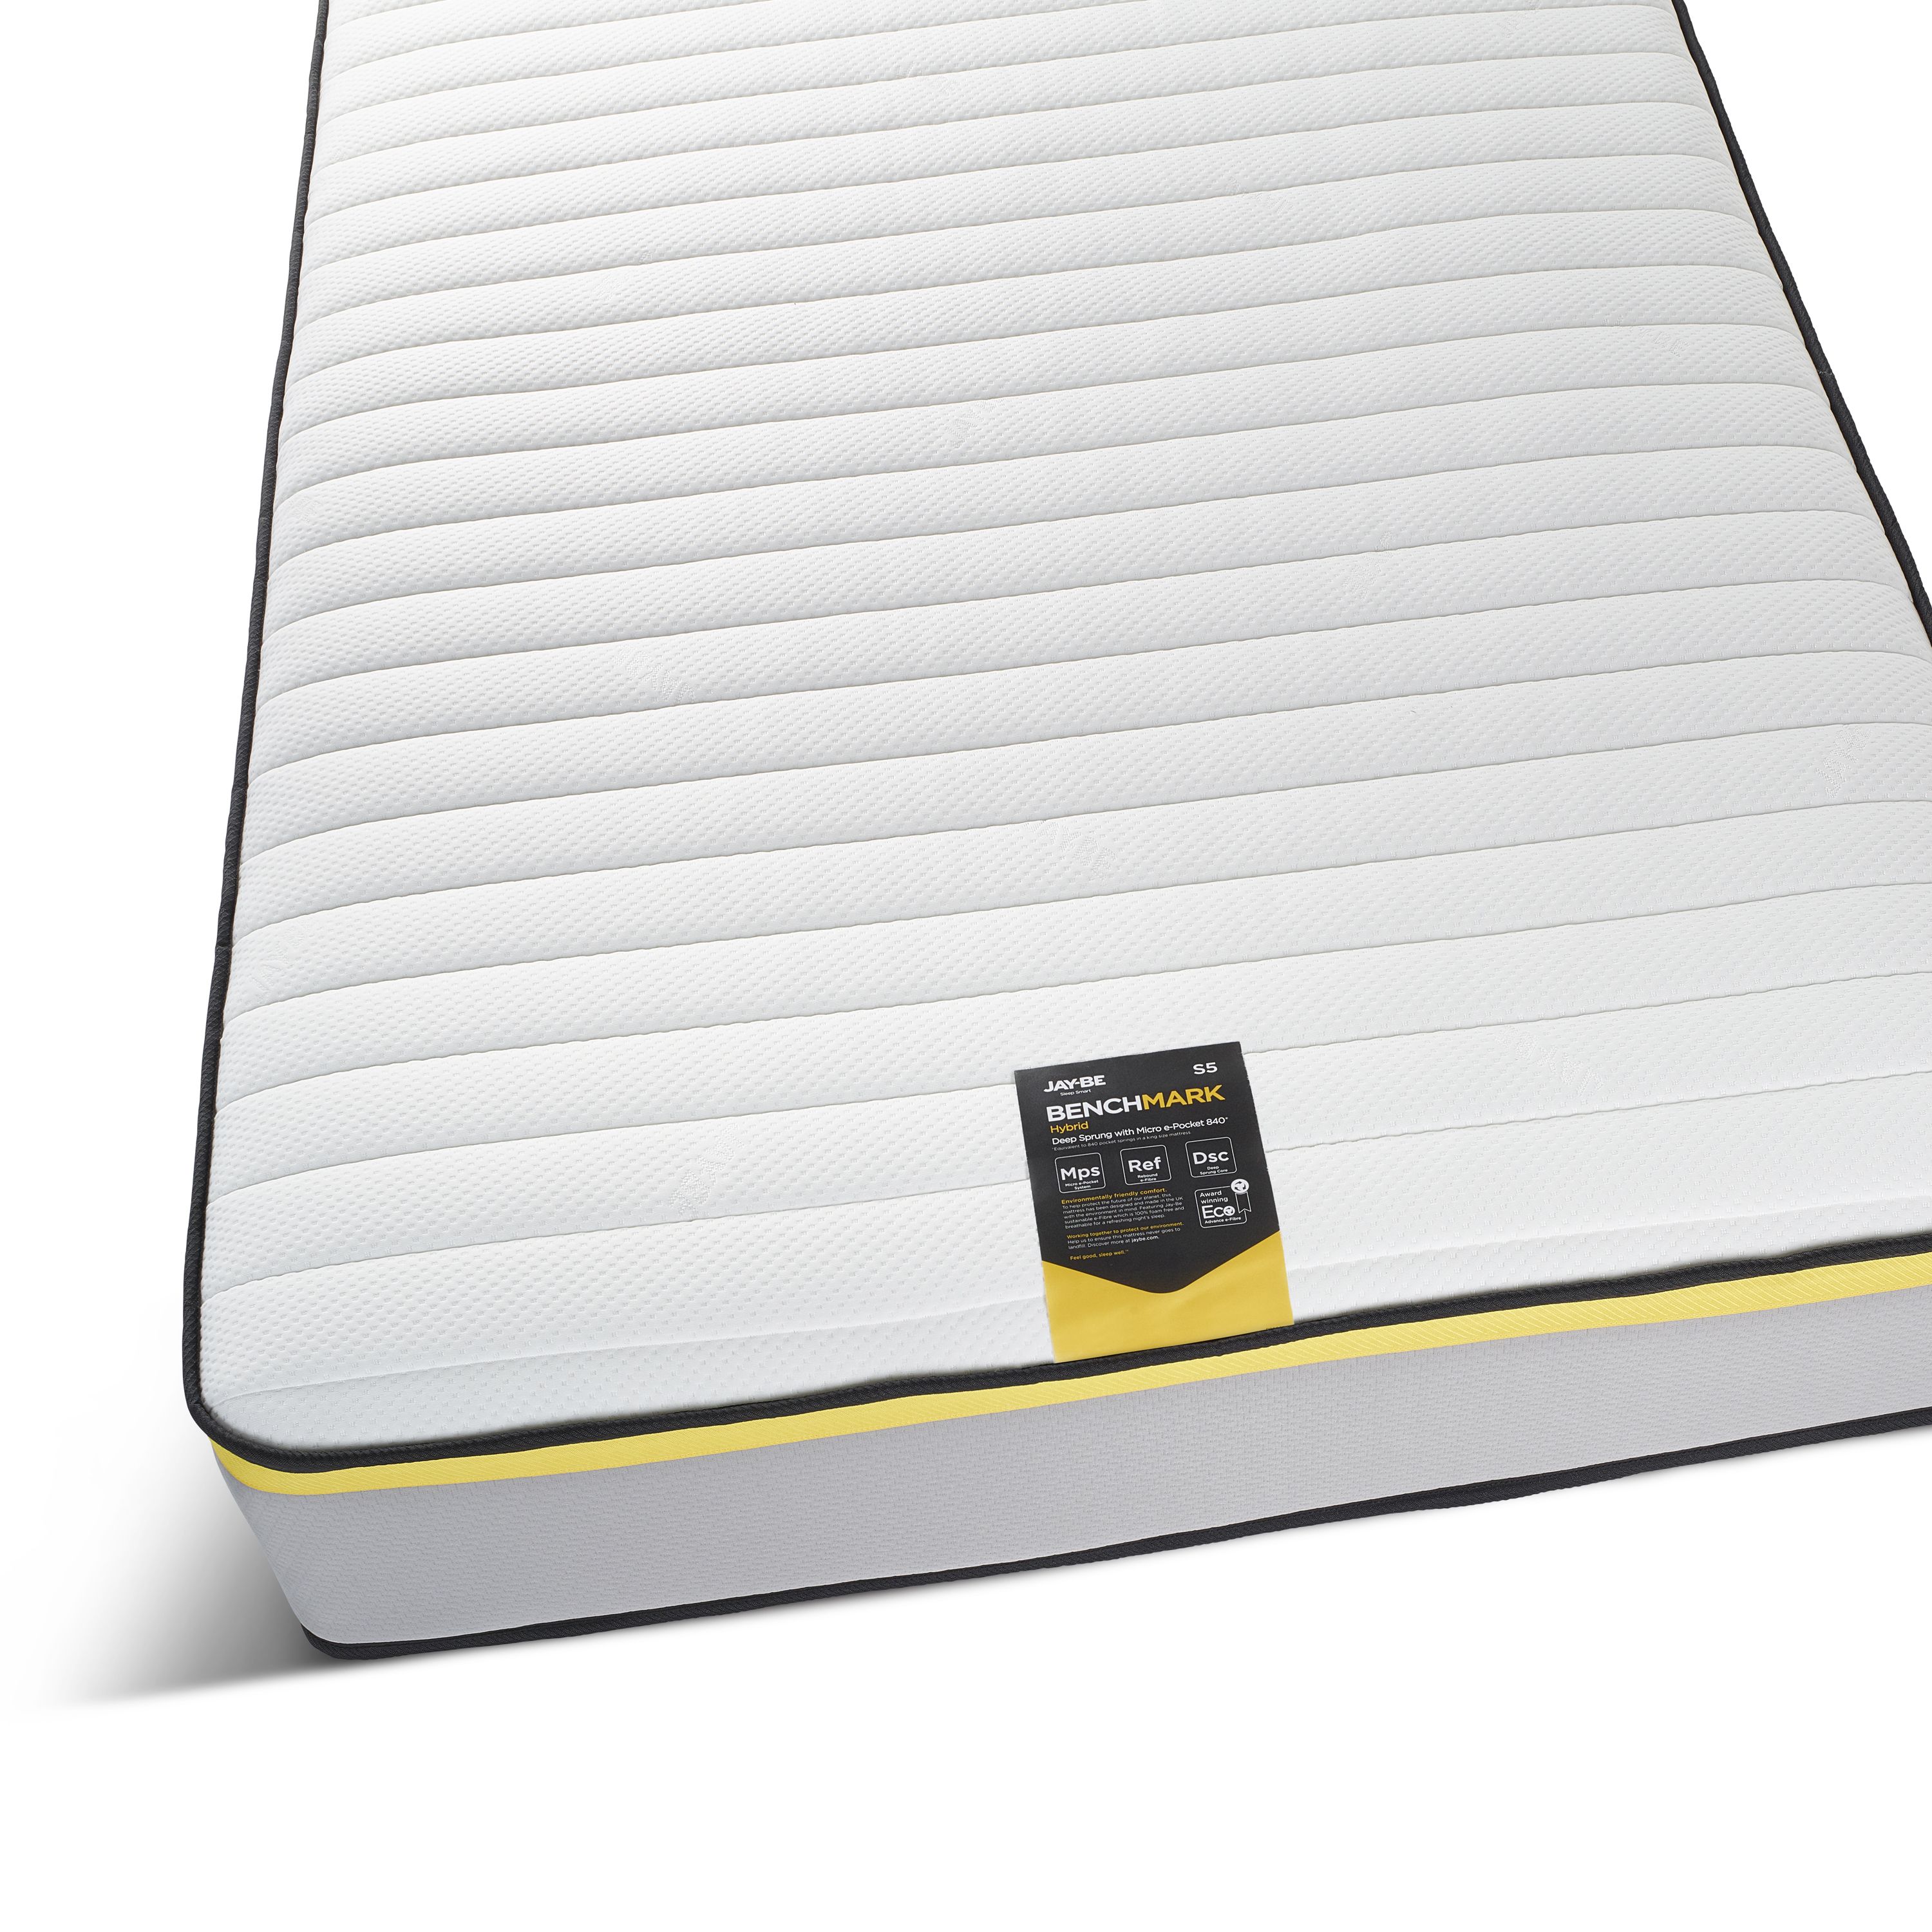 Jay-Be Benchmark S5 Hybrid Eco Friendly Open coil Water resistant Single Mattress